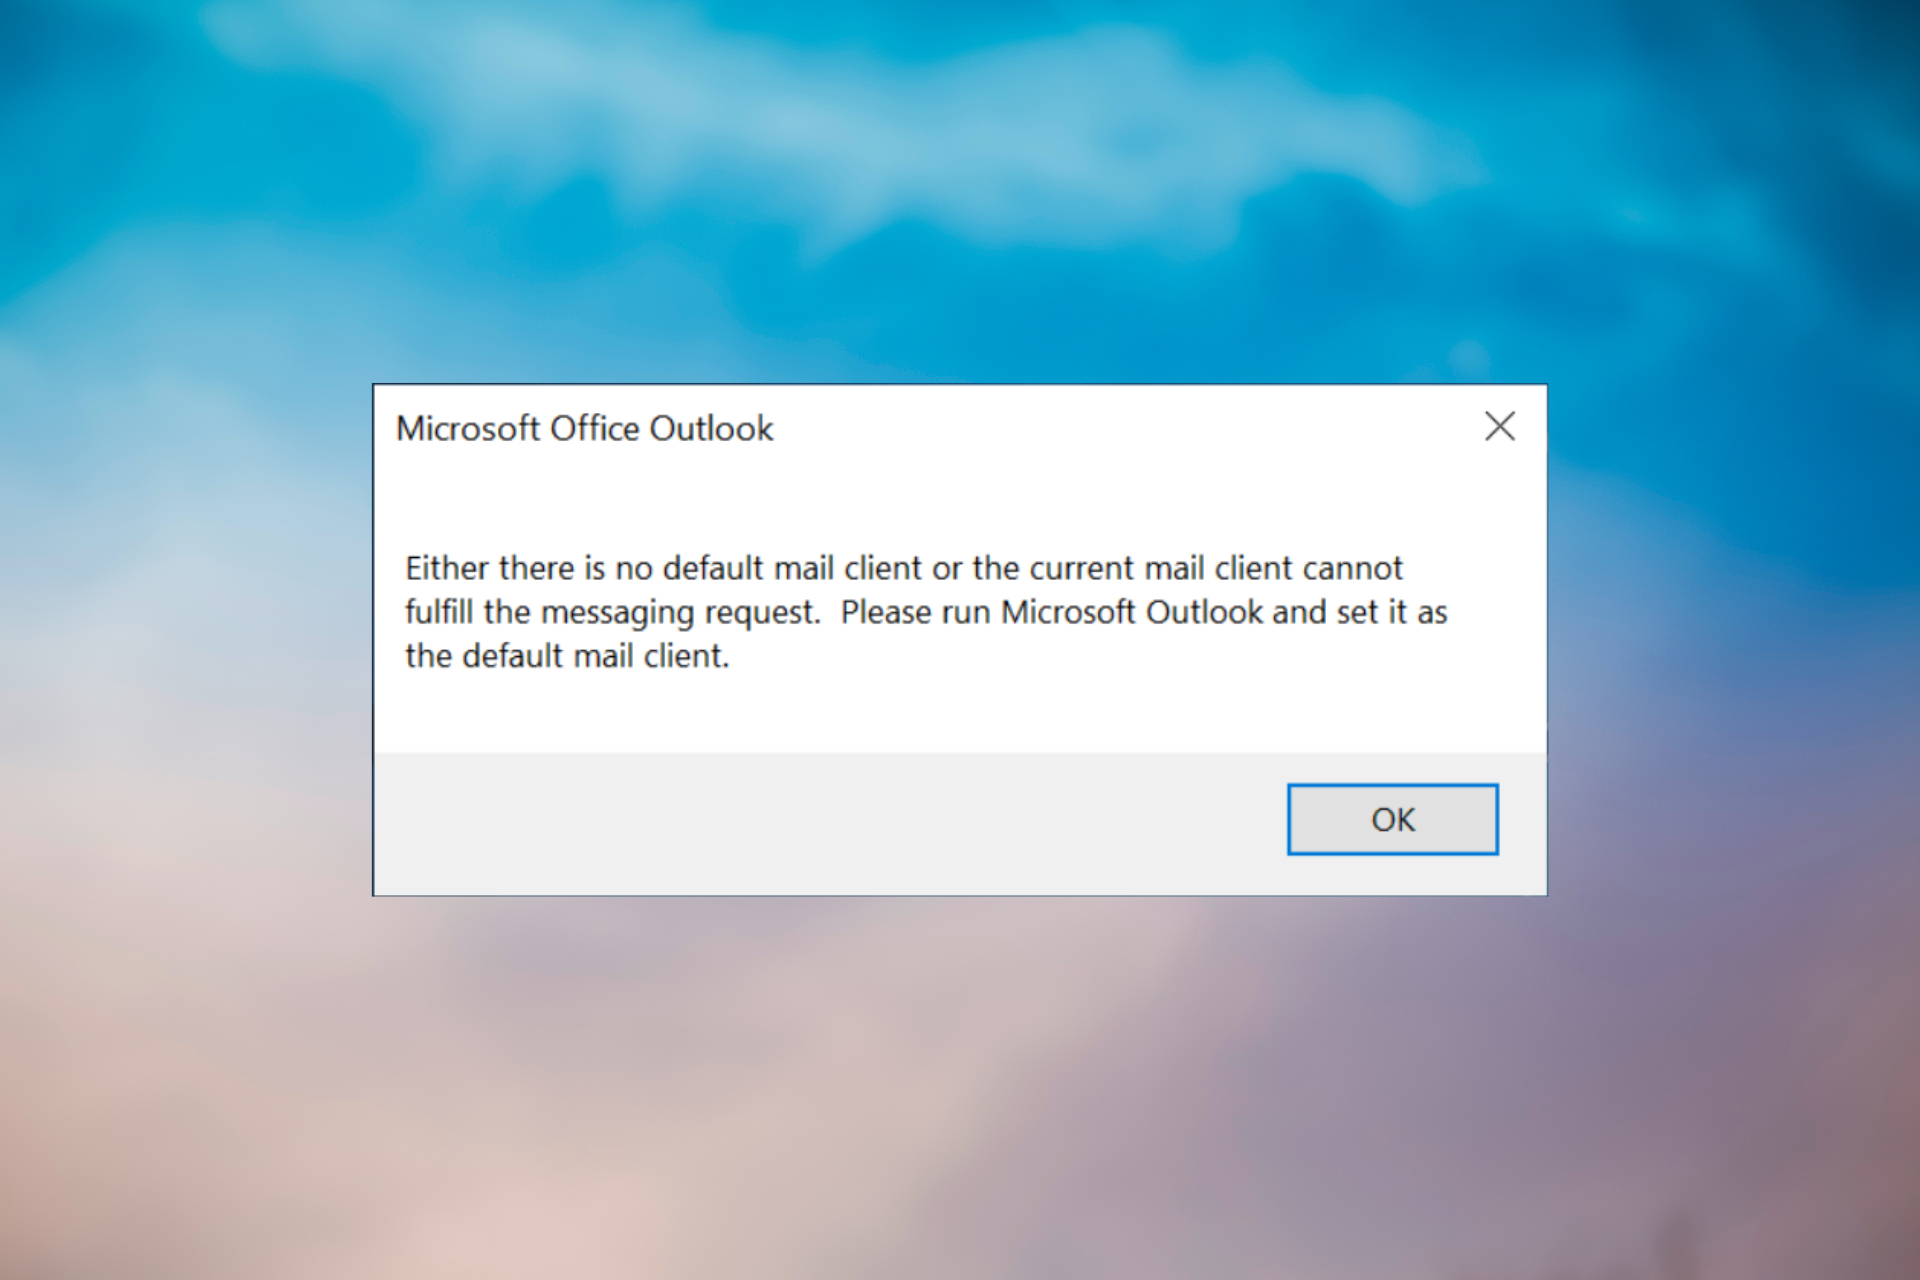 How to fix either there is no default email client Outlook error